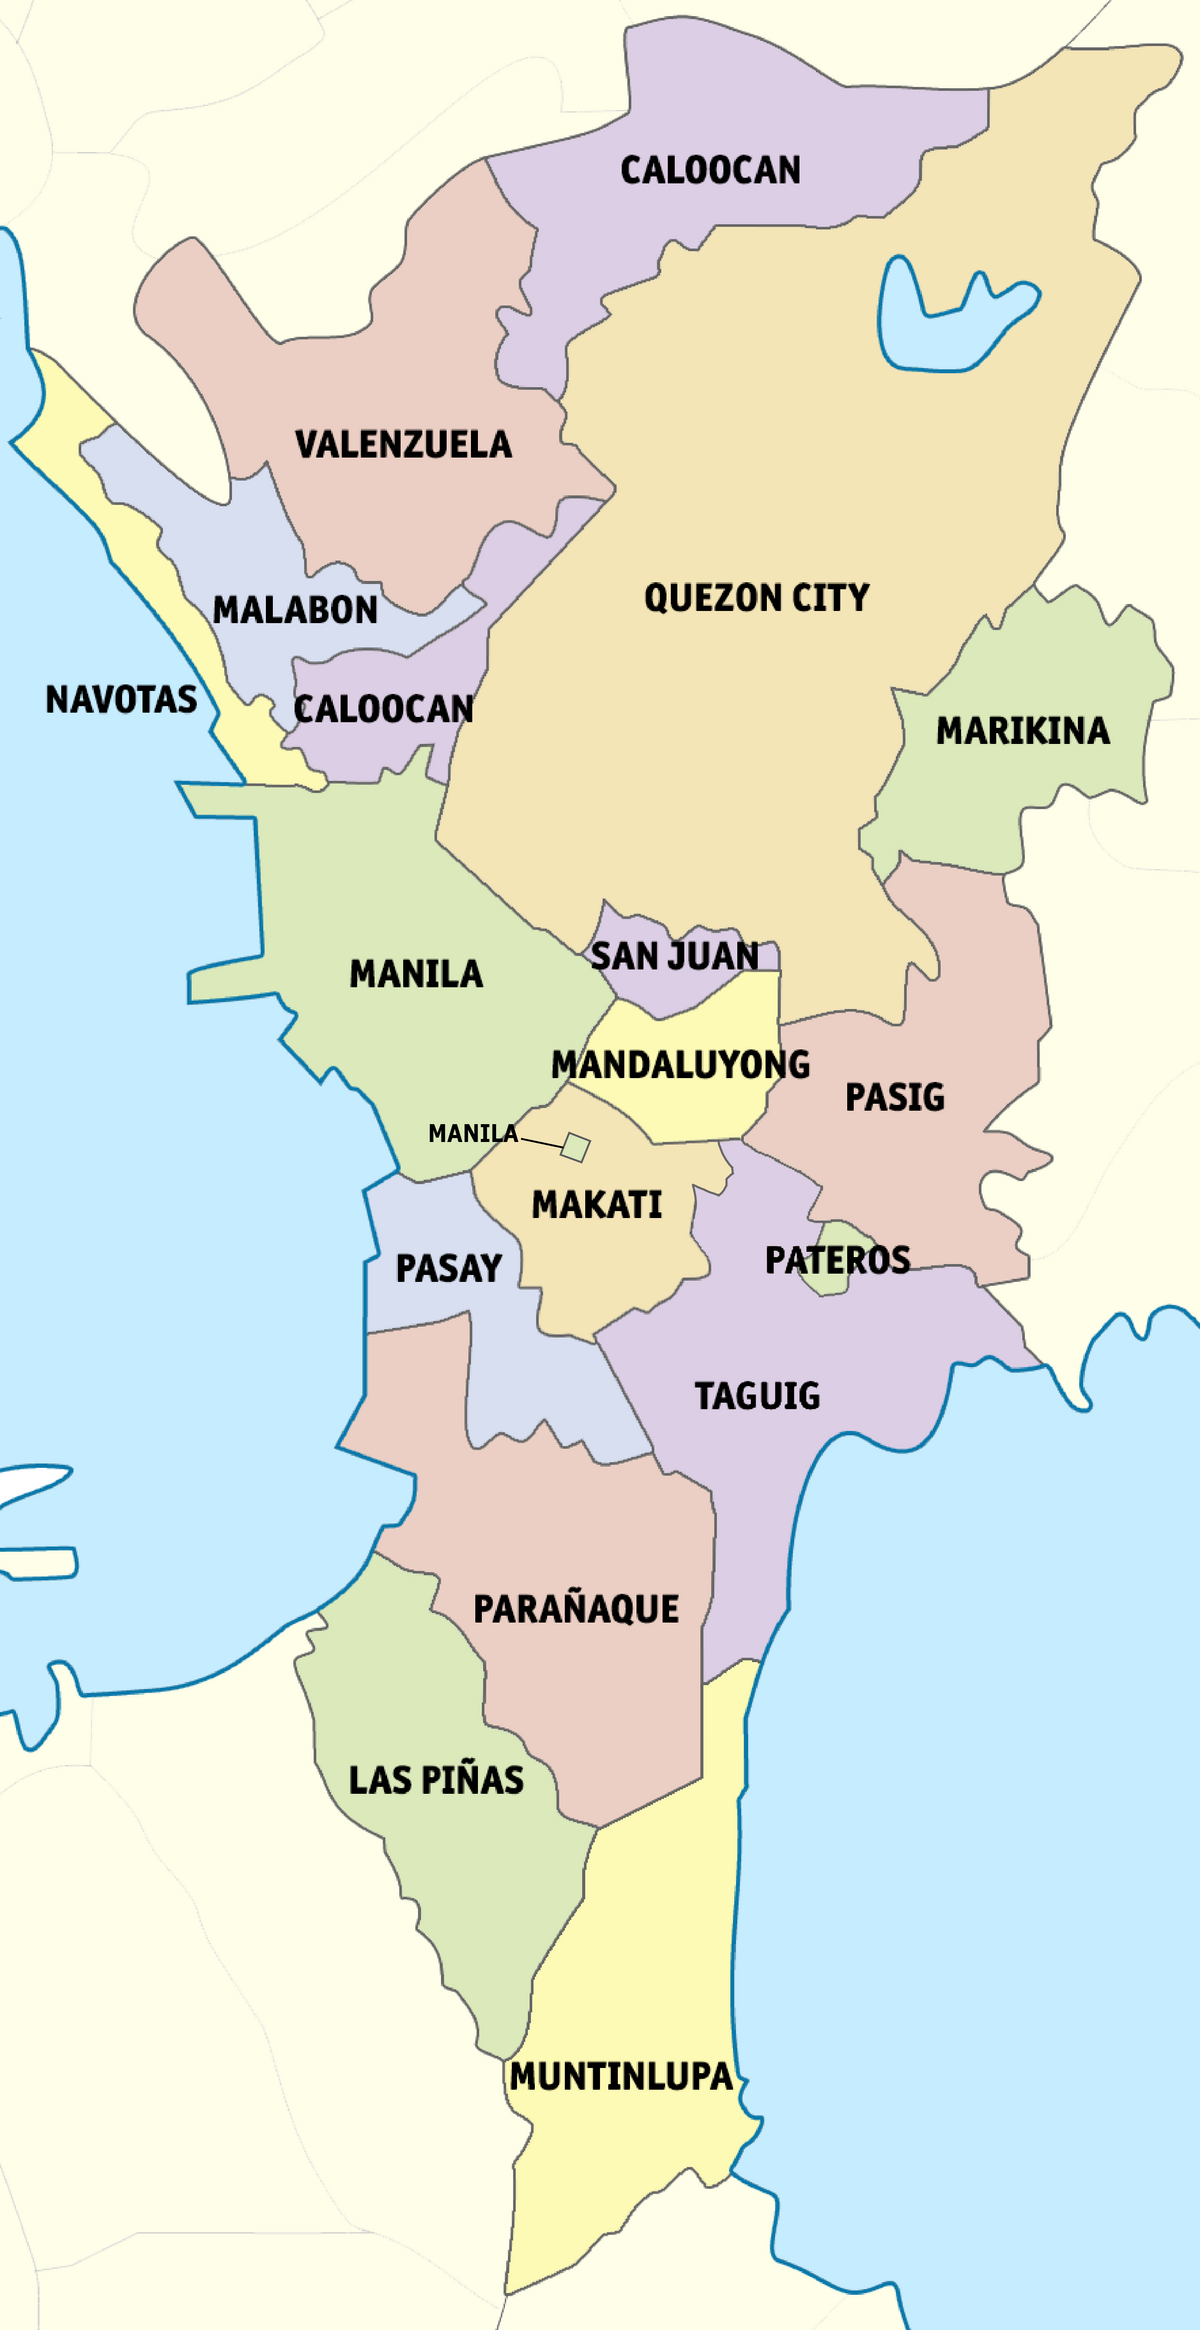 Is Metro Manila a city or town?